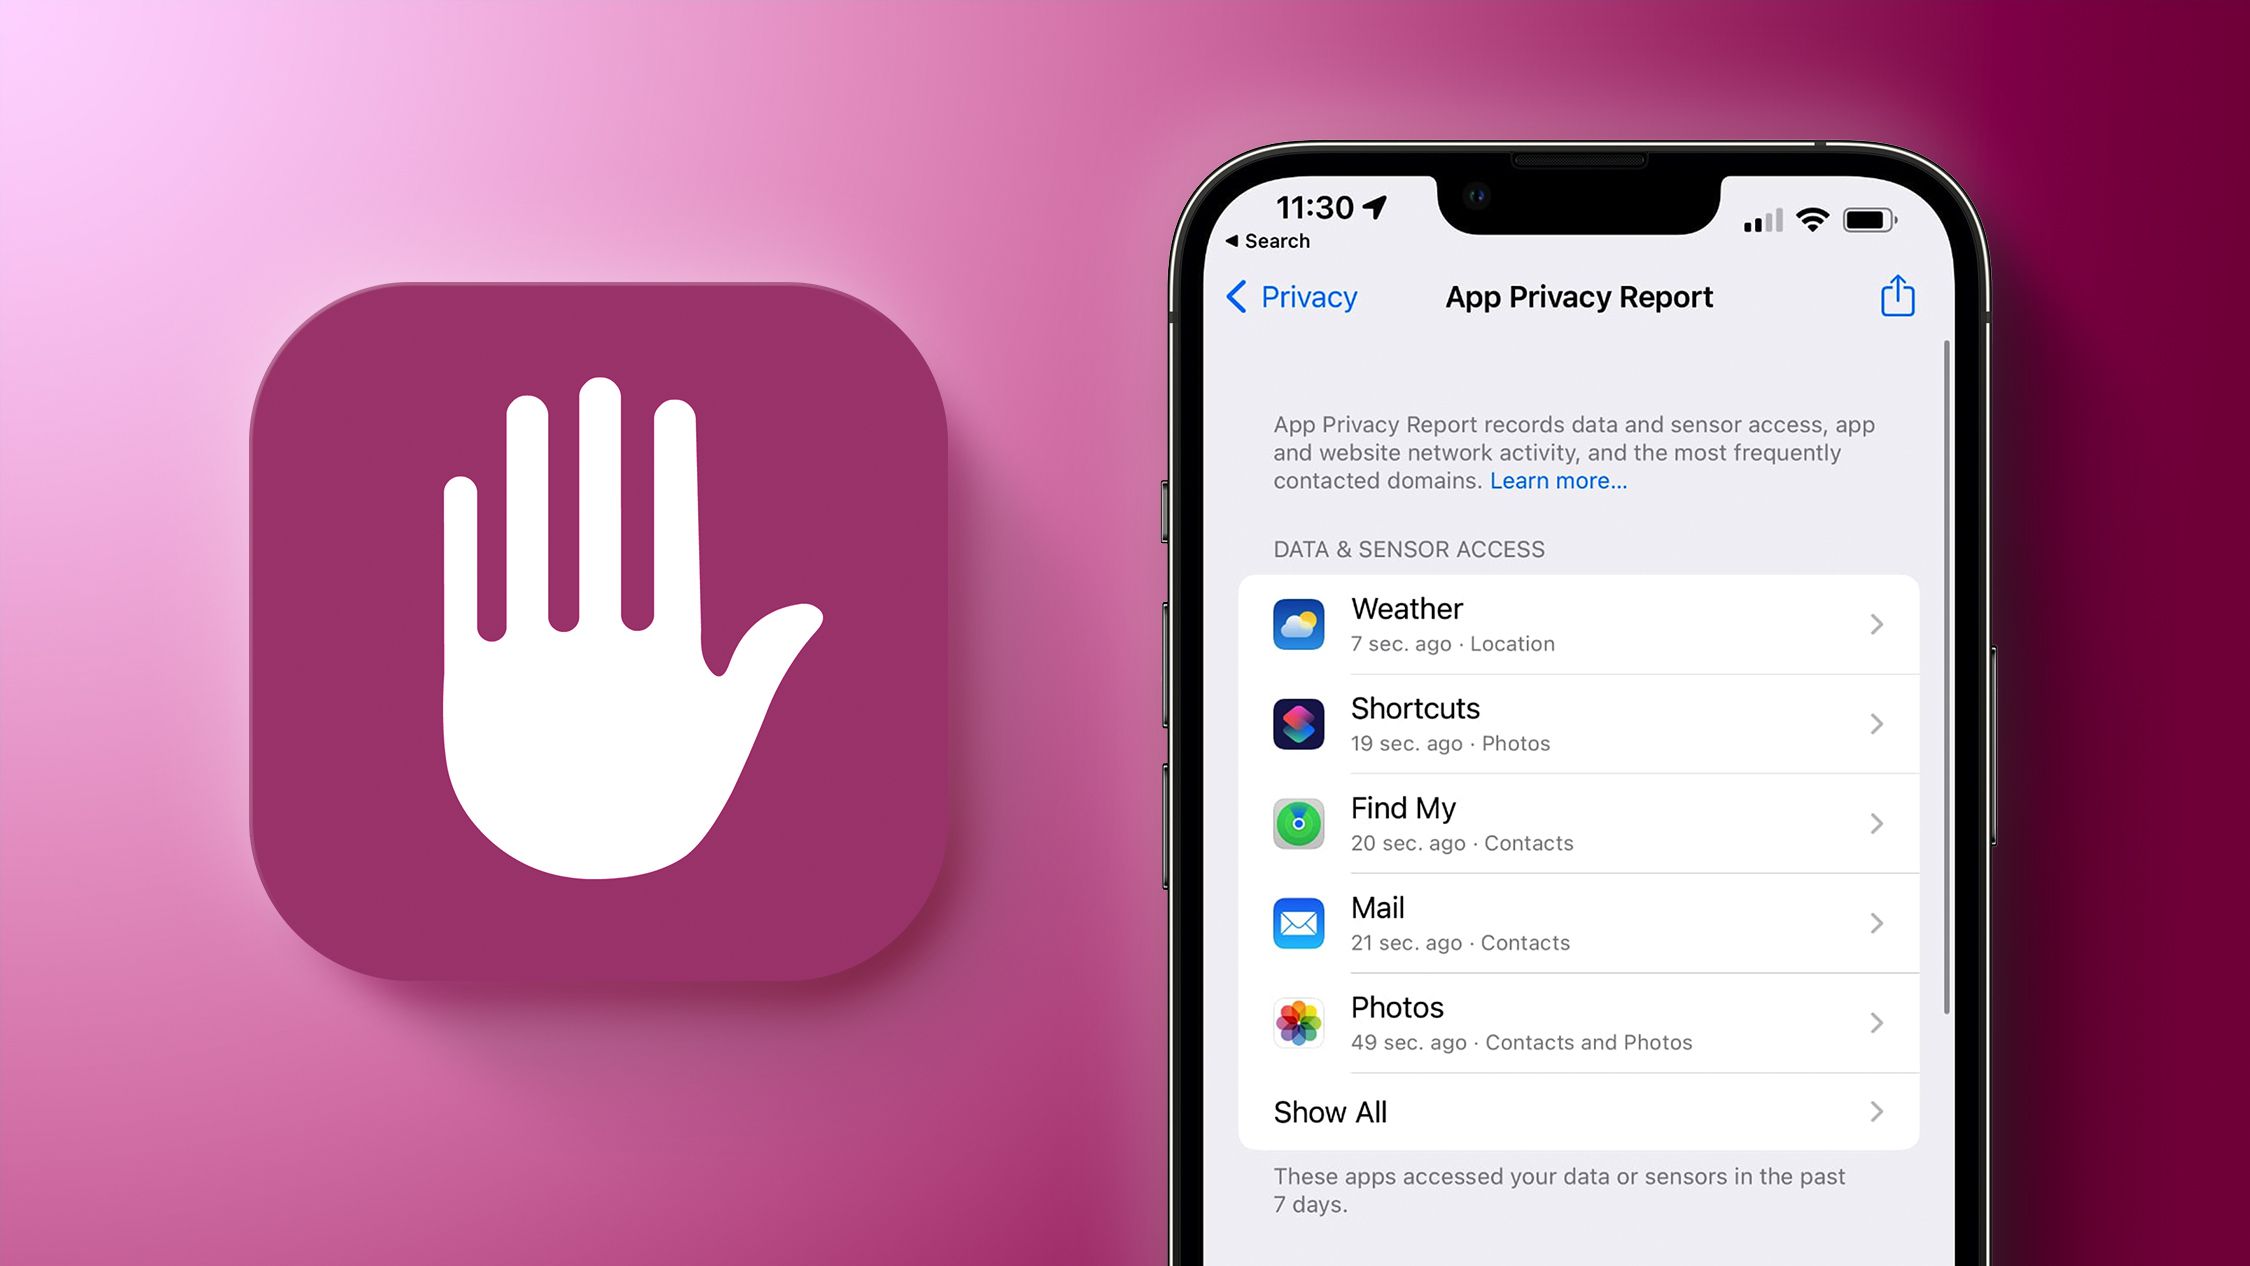 How to Use App Privacy Report in the iOS 15.2 Beta